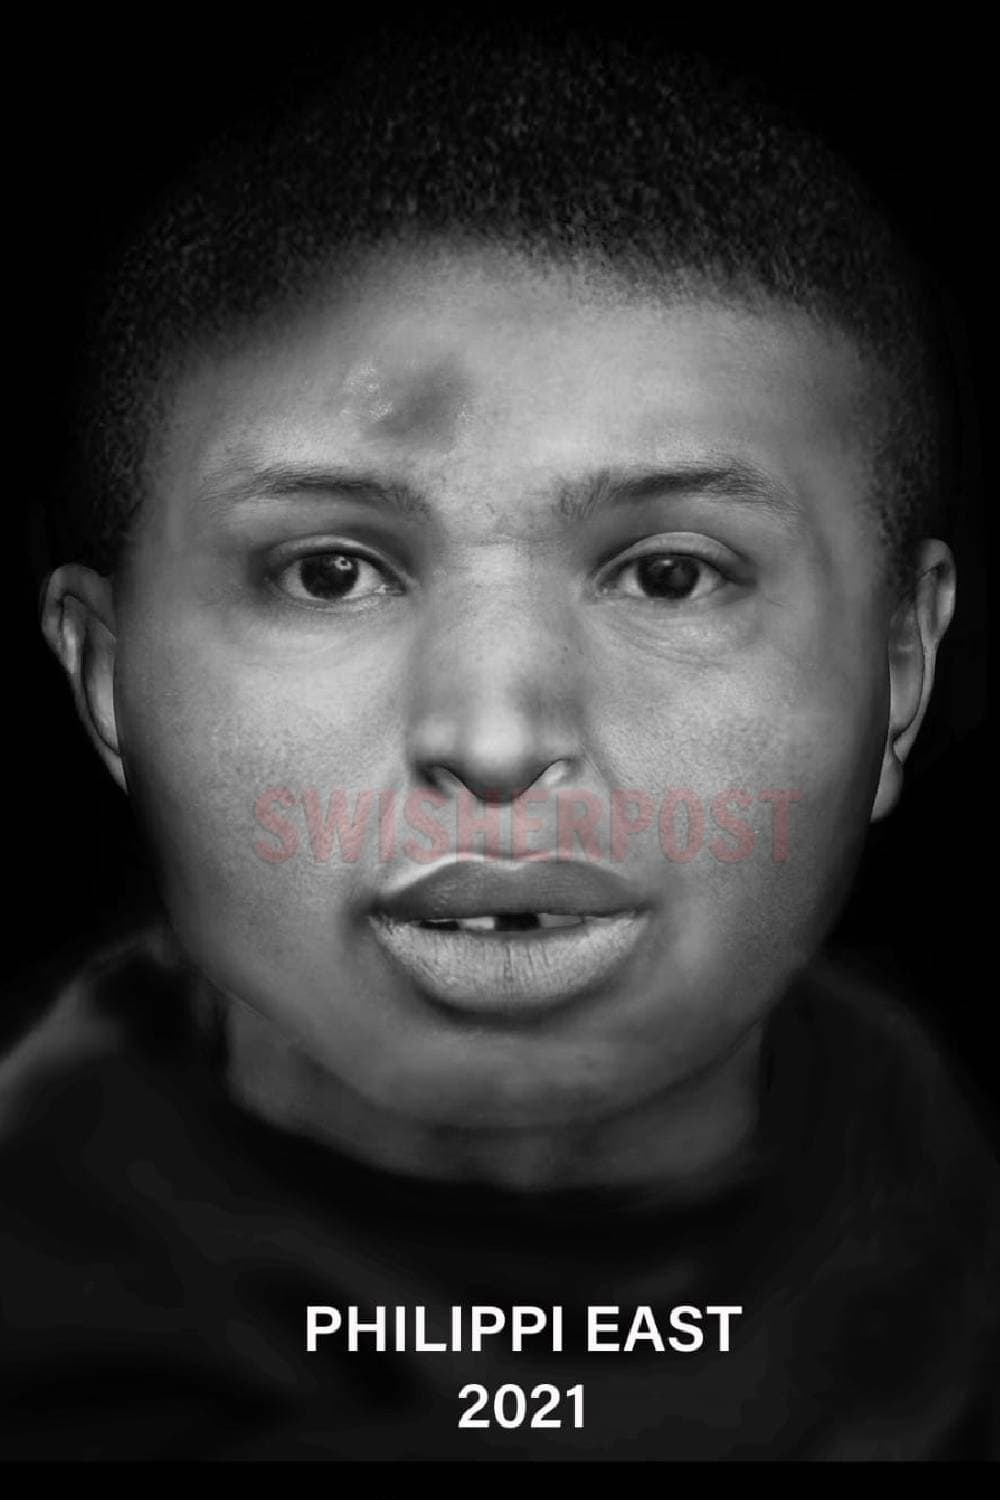 Cape Town cold cases digital facial reconstruction Philippi east